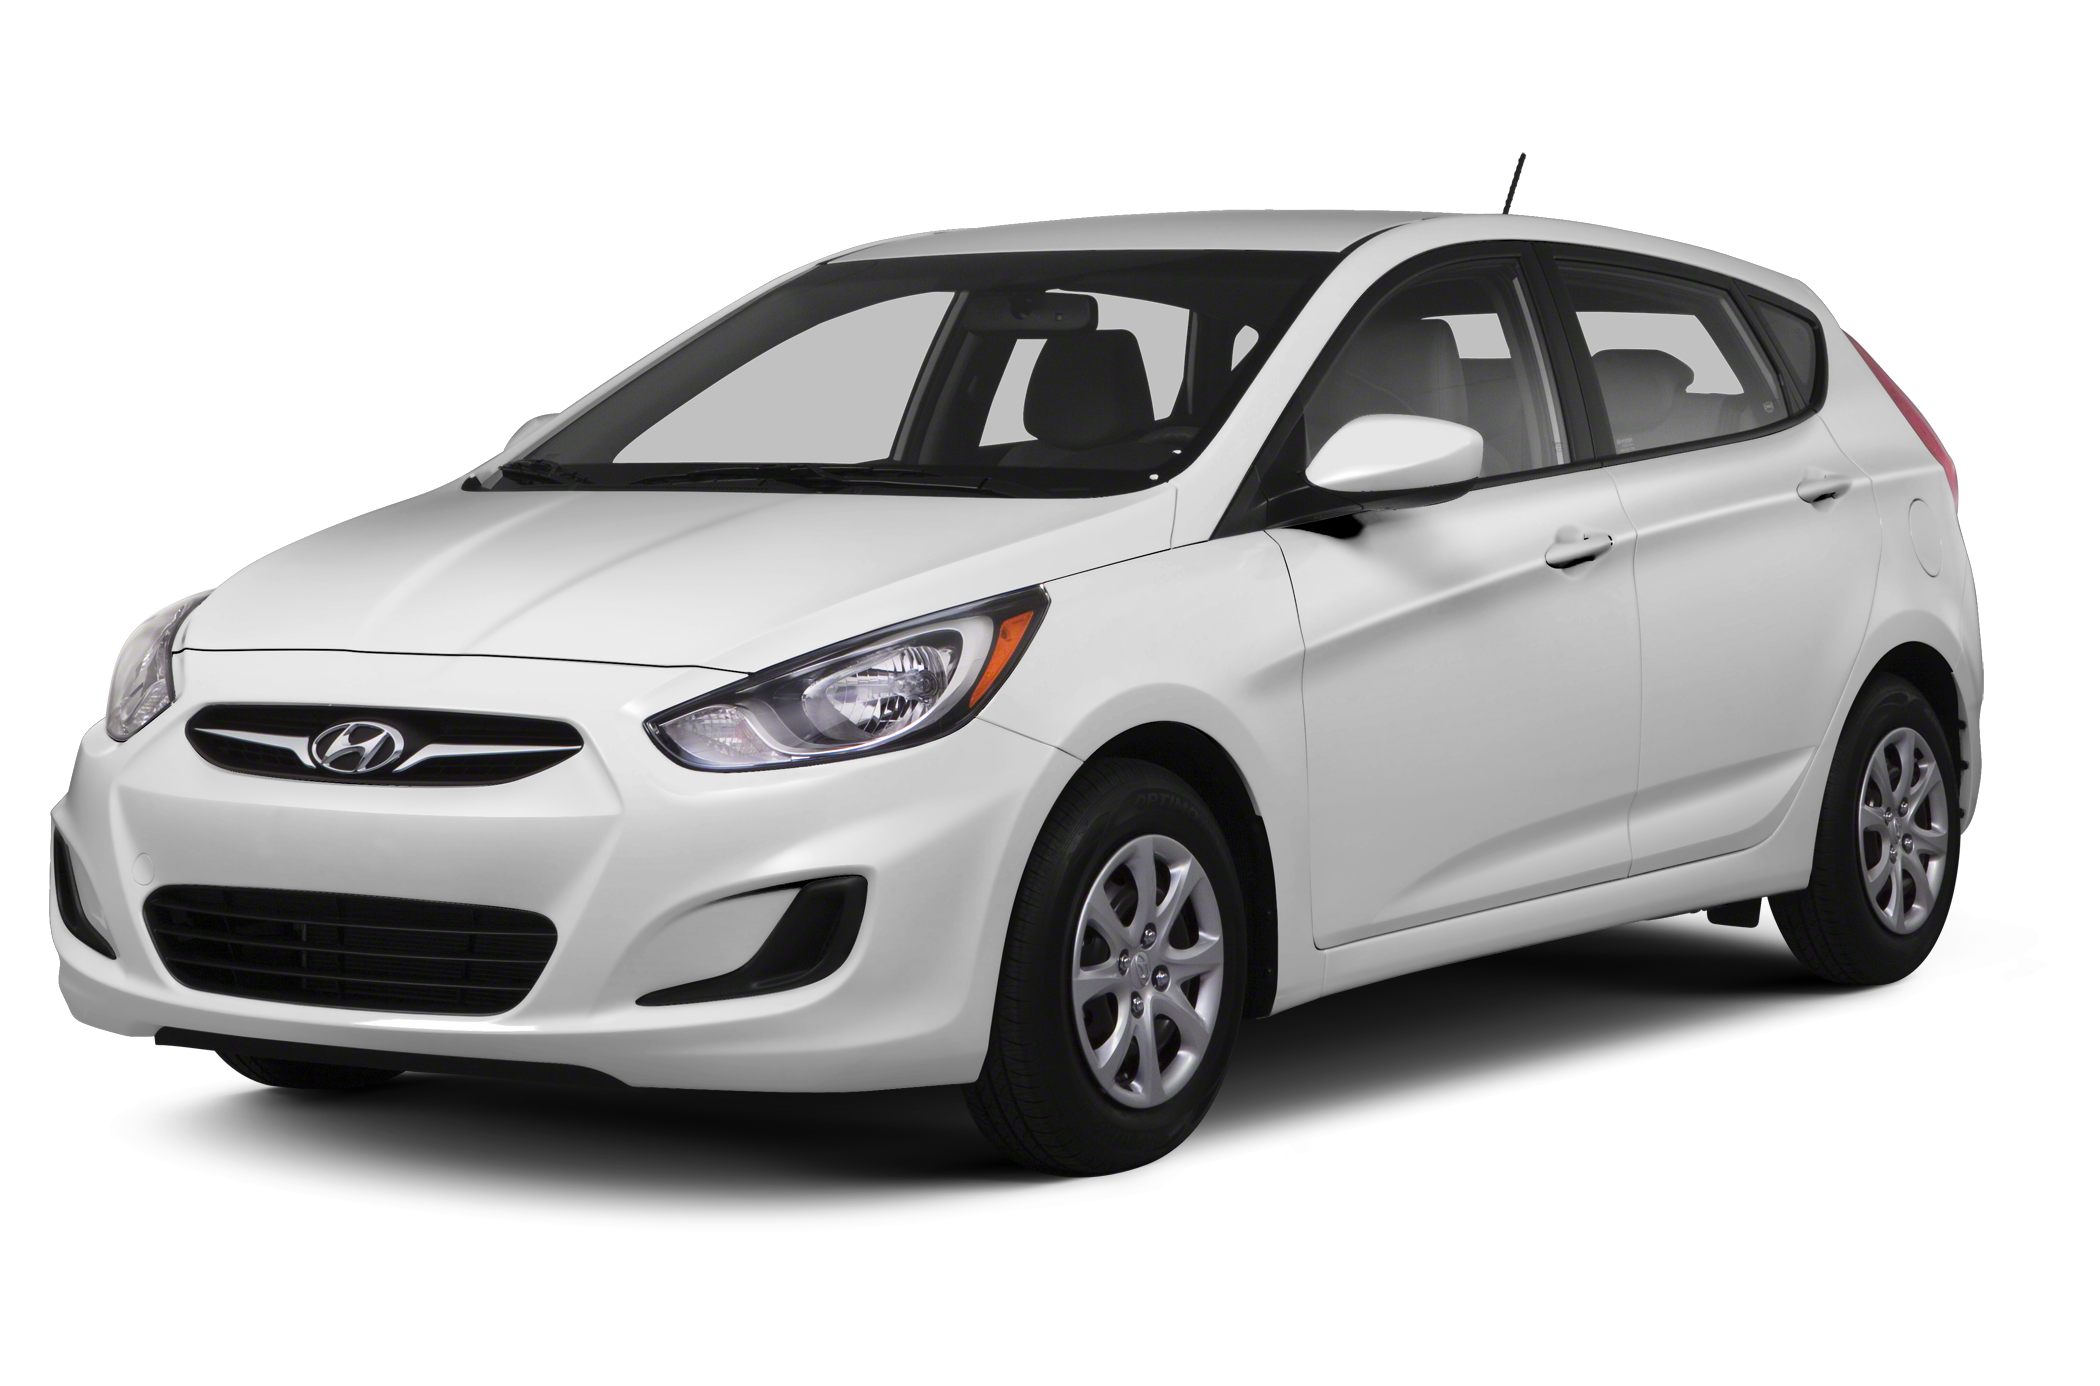 2013 Hyundai Accent oem parts and accessories on sale